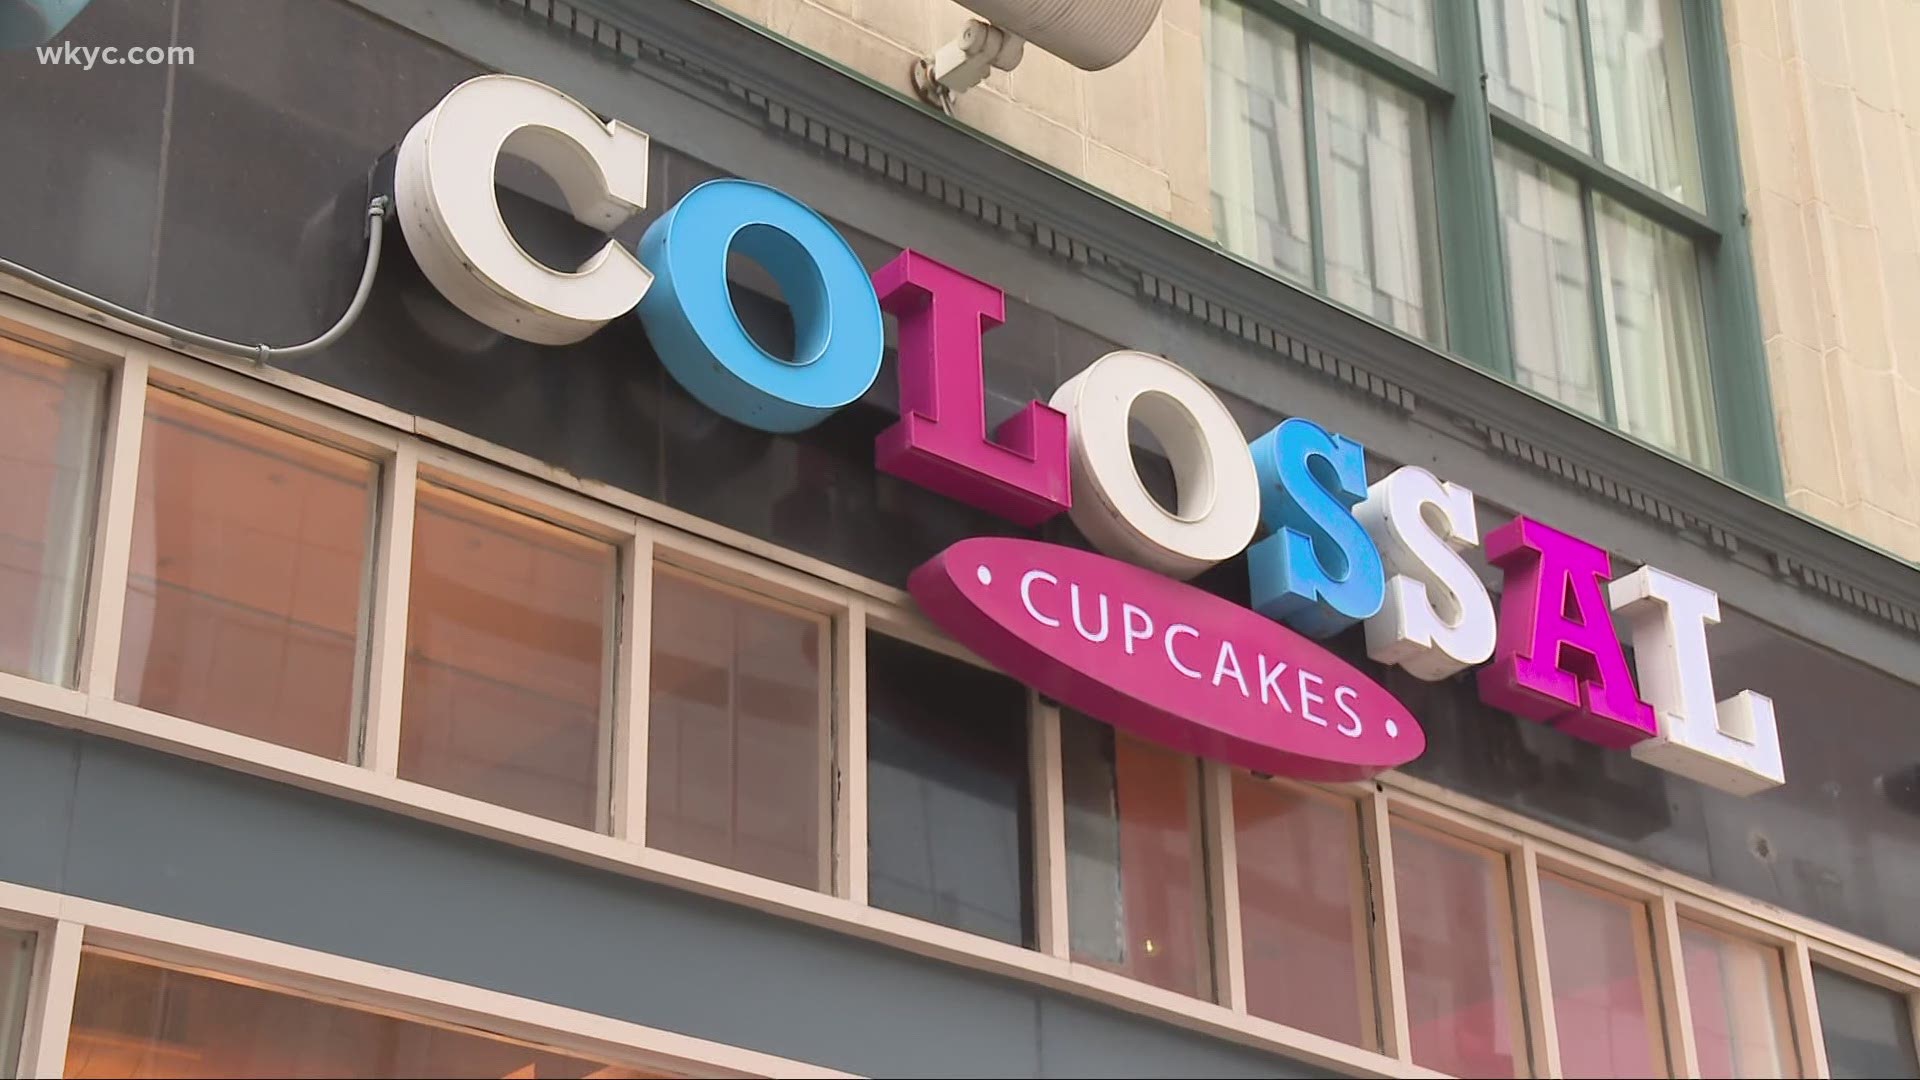 The cupcake shop survived the COVID-19 shutdown, only to get destroyed by rioters in May.